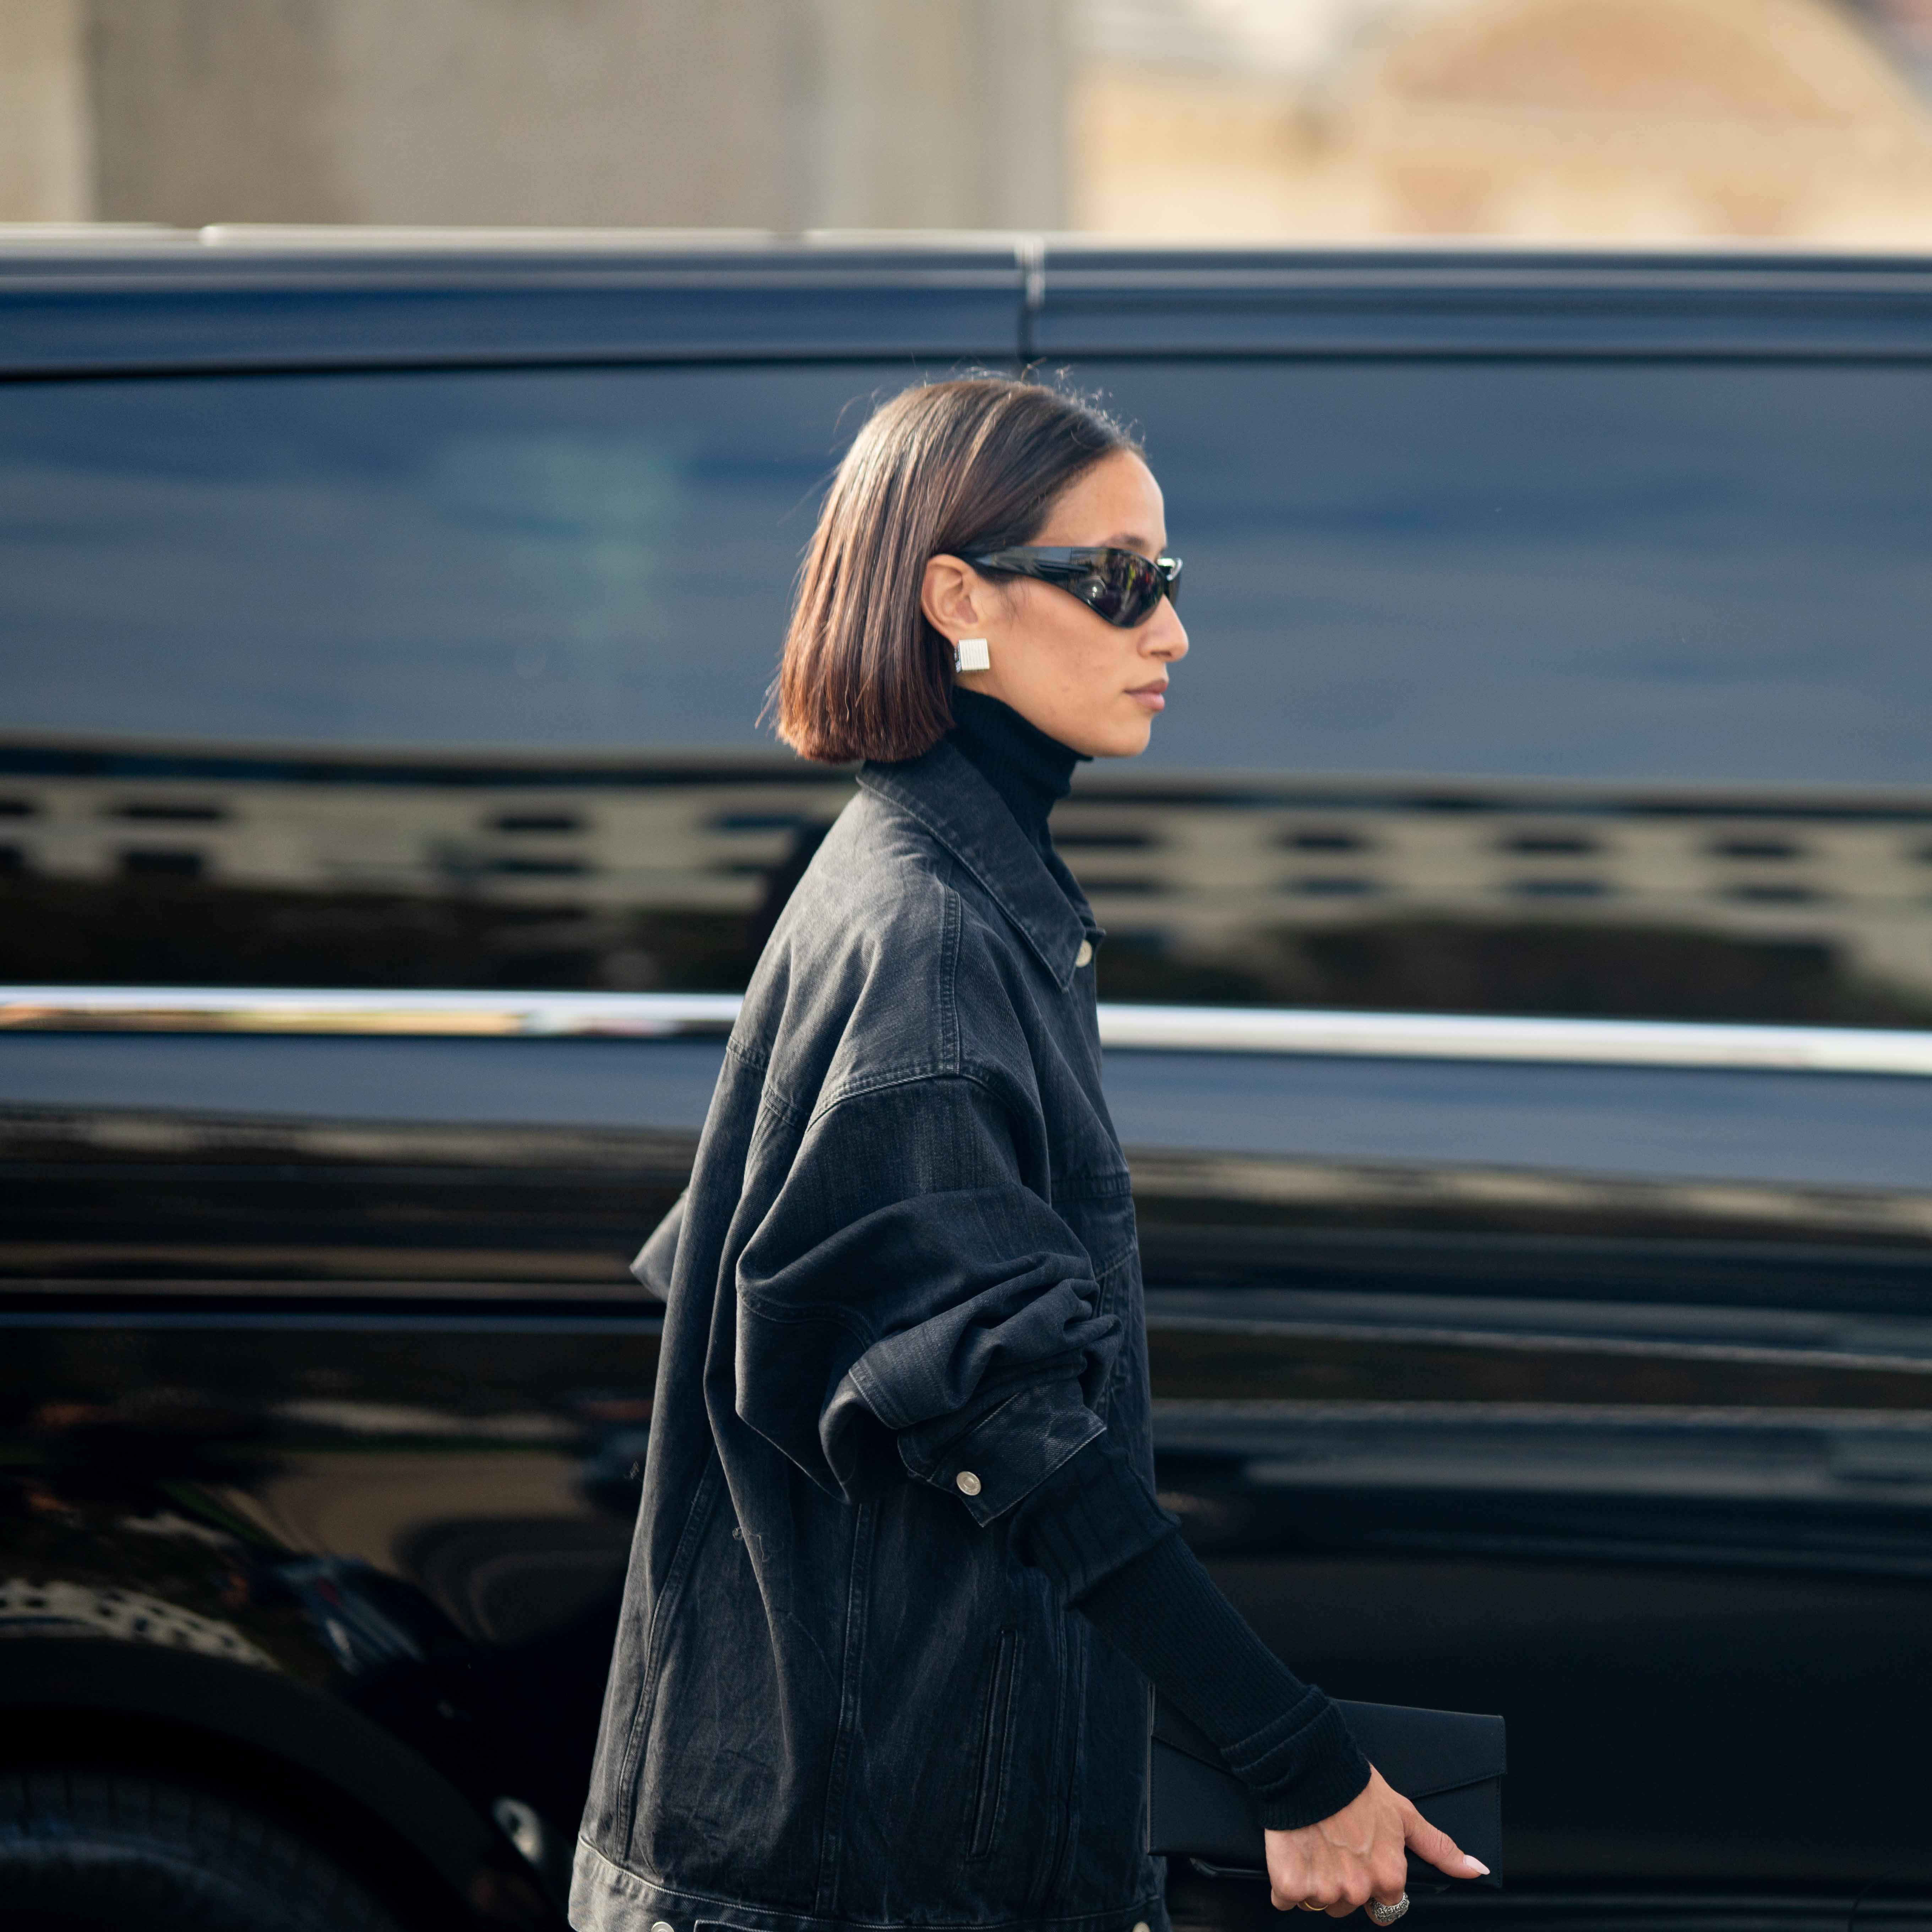 Alexandra Guerain Wearing Black Denim Jacket With Polo Neck Jumper After Givenchy SS24 Paris Fashion Week Street Style.